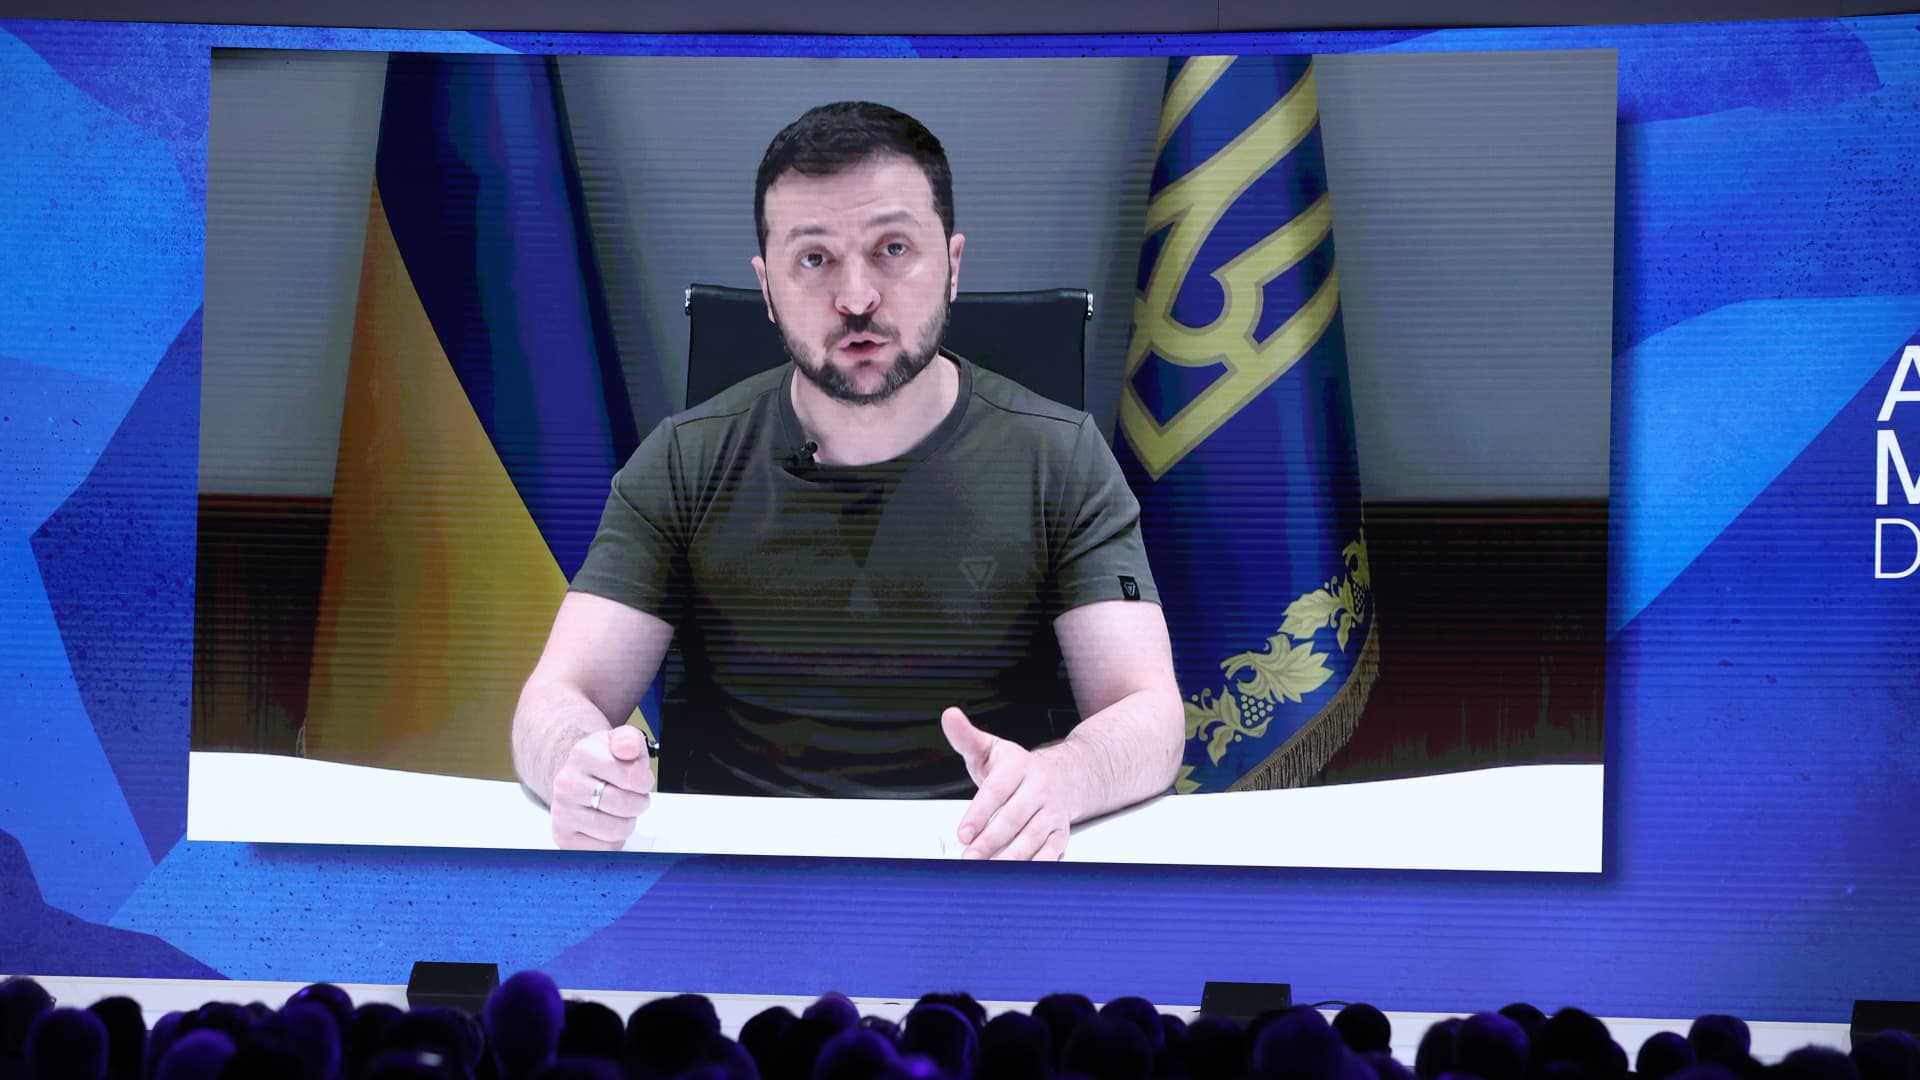 UN says 6.5 million Ukrainians have become refugees; Zelenskyy tells Davos the world is at a ‘turning point’ – CNBC